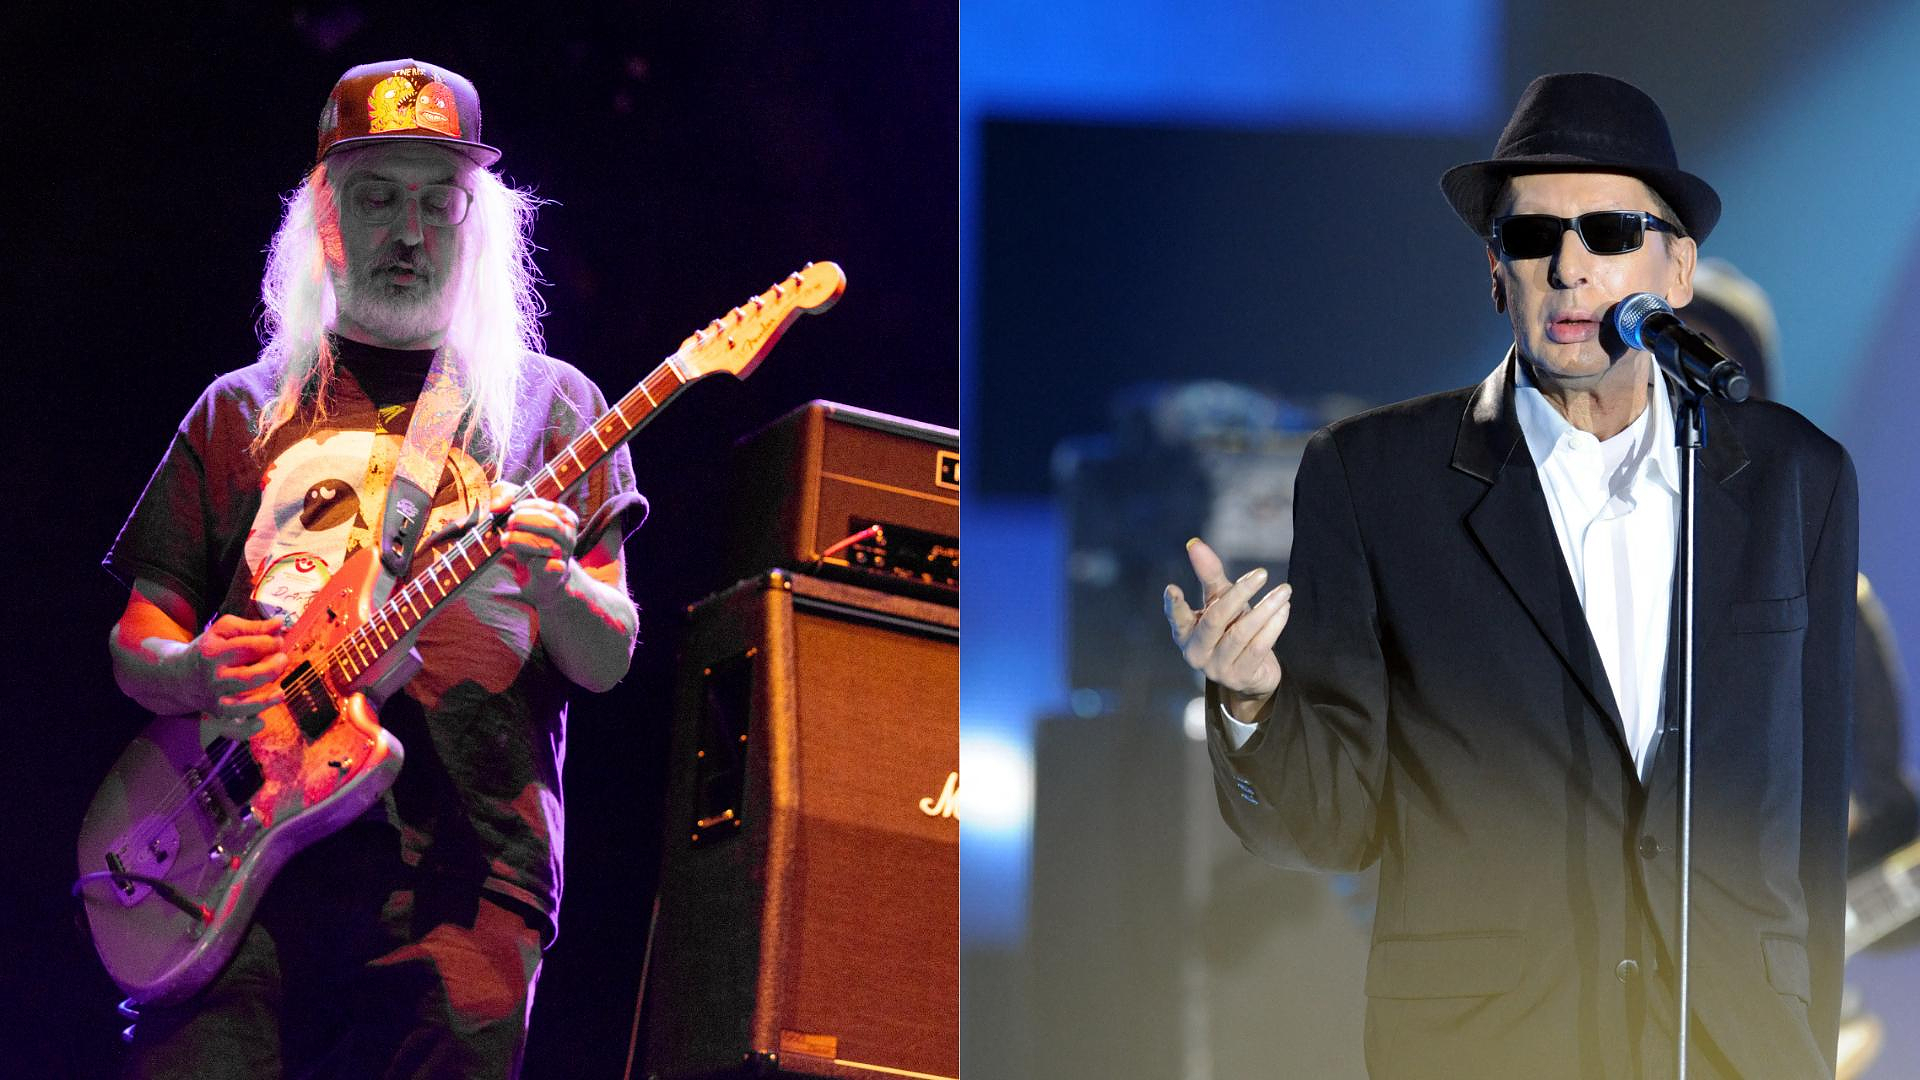 J Mascis makes the guitars roar and Alain Bashung comes back to life with a new track